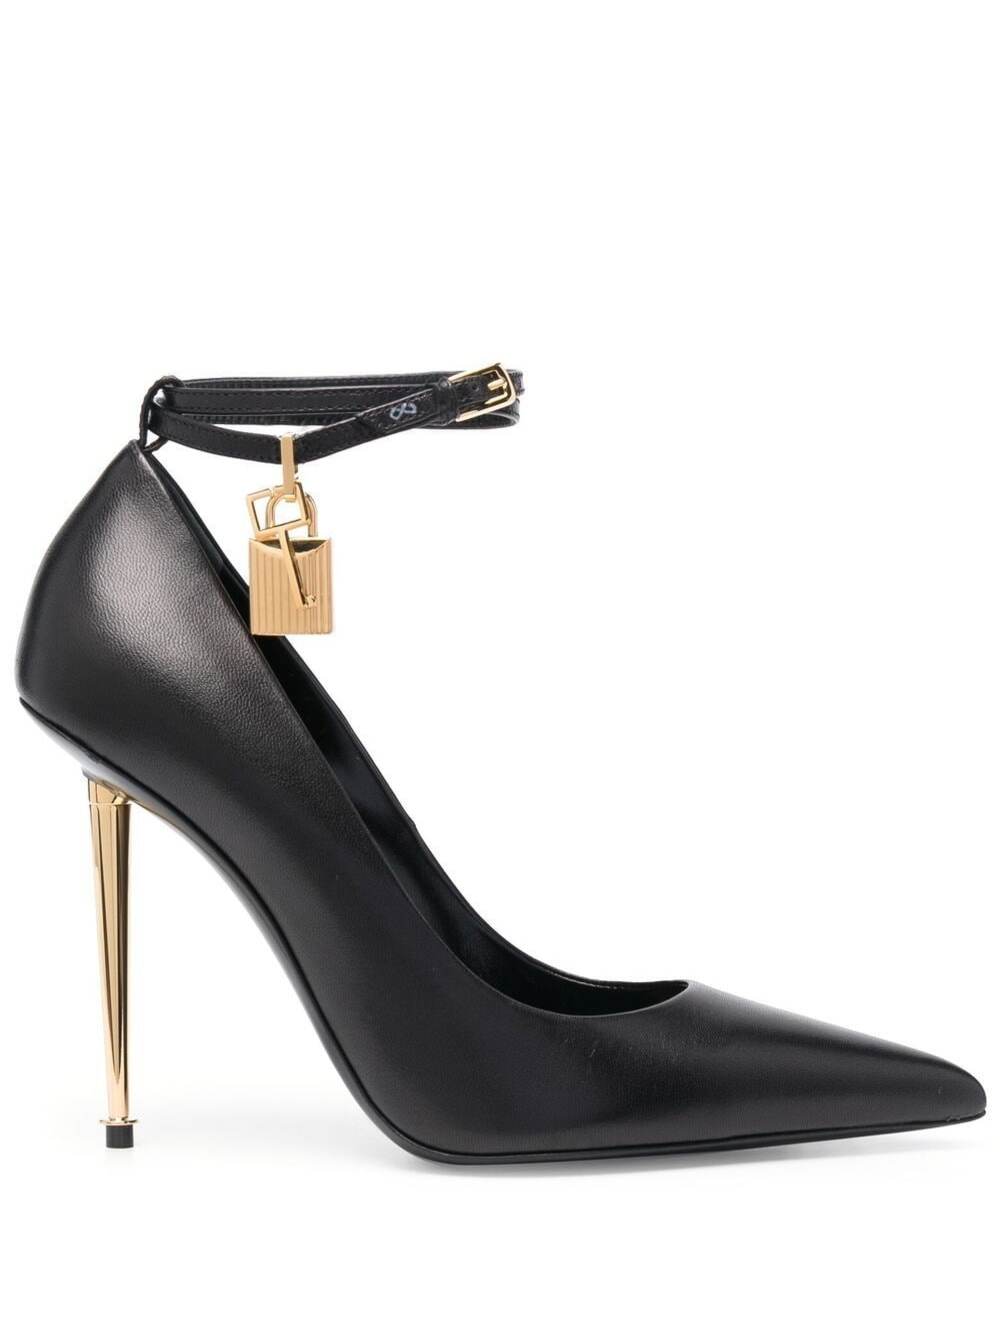 Tom Ford Black Pumps With Padlock Detail In Smooth Leather Woman